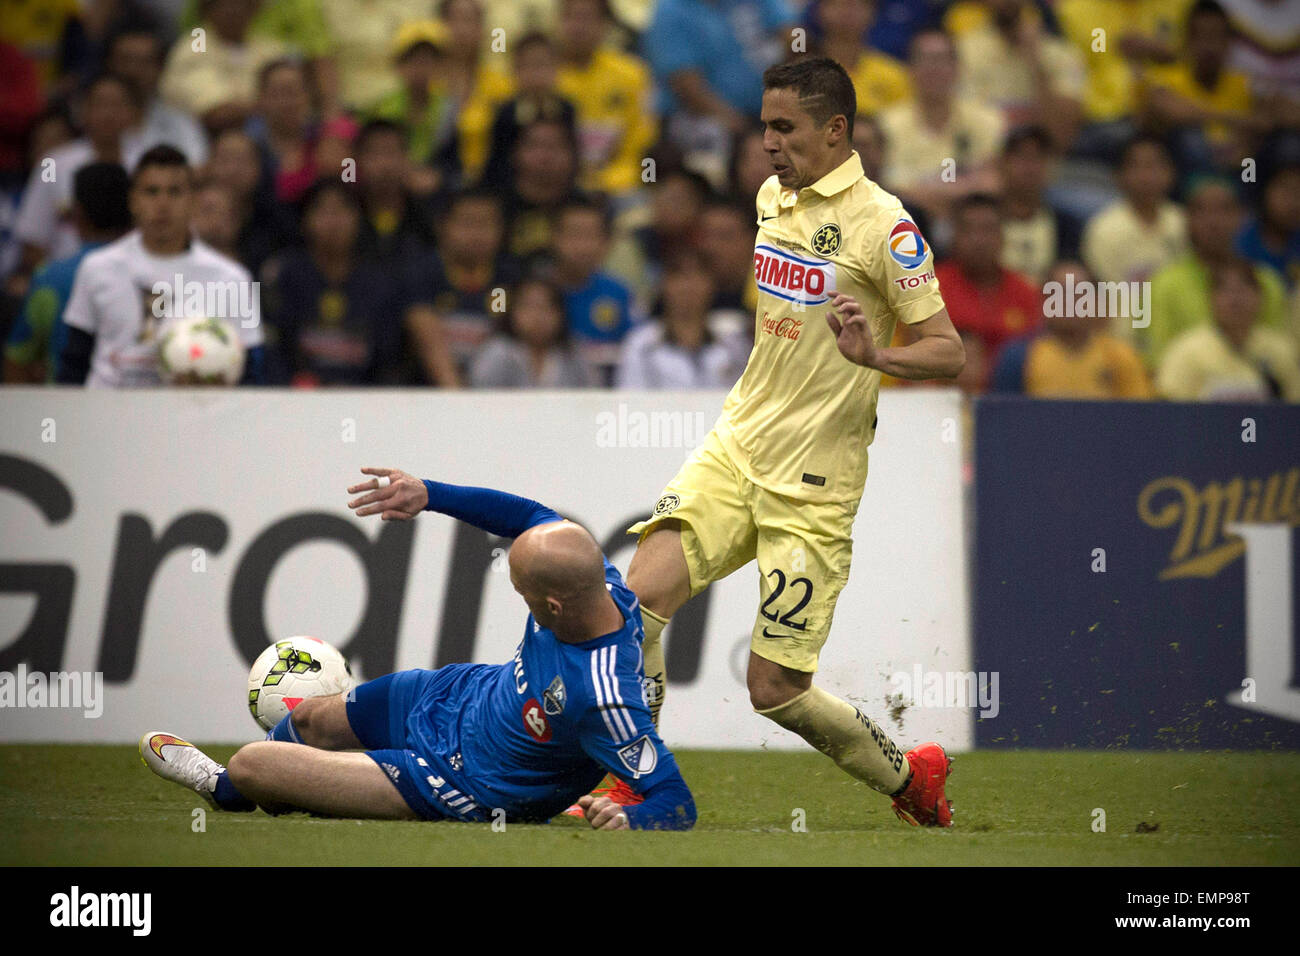 Mexico City, Mexico. 22nd Apr, 2015. America's Paul Aguilar (R) vies with Montreal Impact's Laurent Ciman during the first leg final match of the Confederation of North, Central American and Caribbean Association Football (CONCACAF) Champions League in Mexico City, capital of Mexico, on April 22, 2015. Credit:  Alejandro Ayala/Xinhua/Alamy Live News Stock Photo